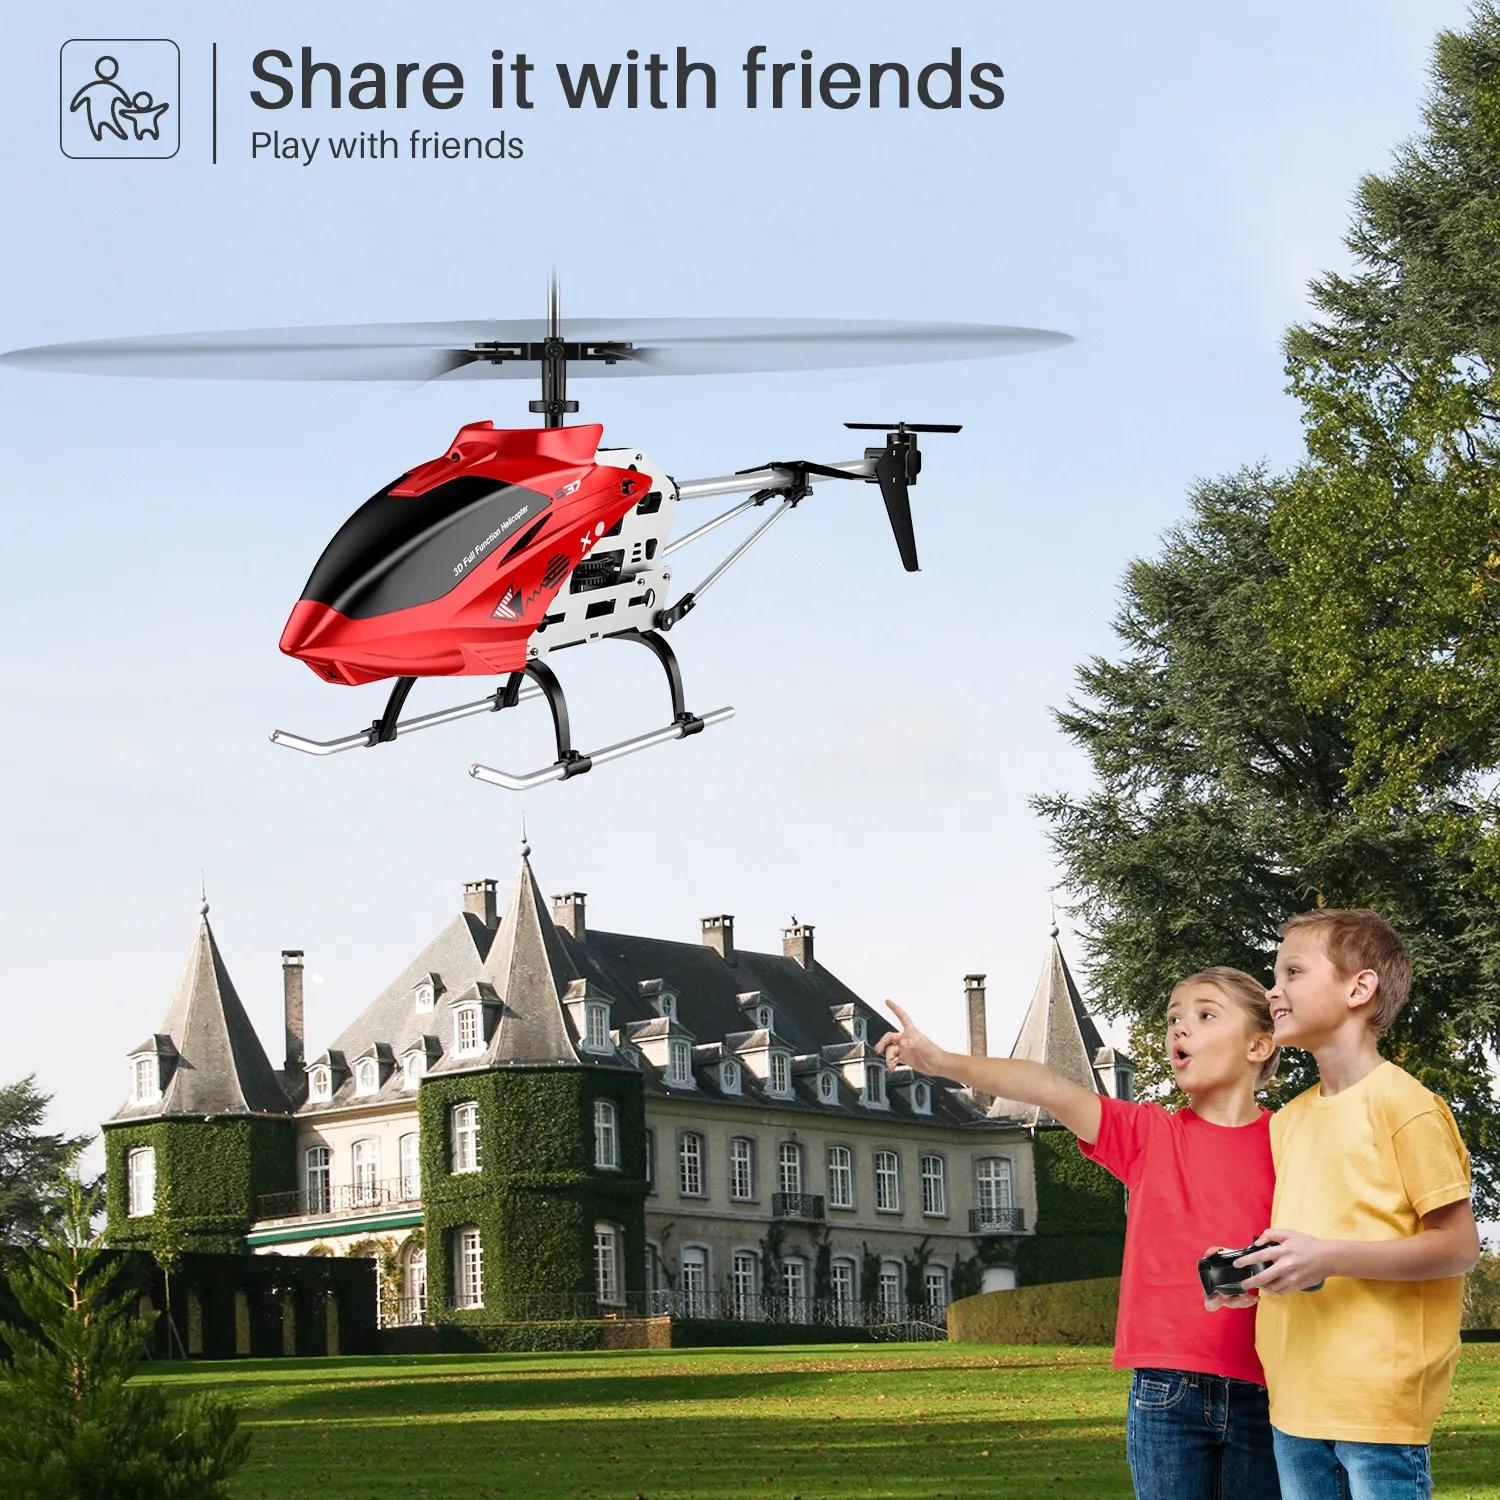 Syma S37 Rc Helicopter: The S37 RC Helicopter: Designed With Safety Features for Kids and Beginners